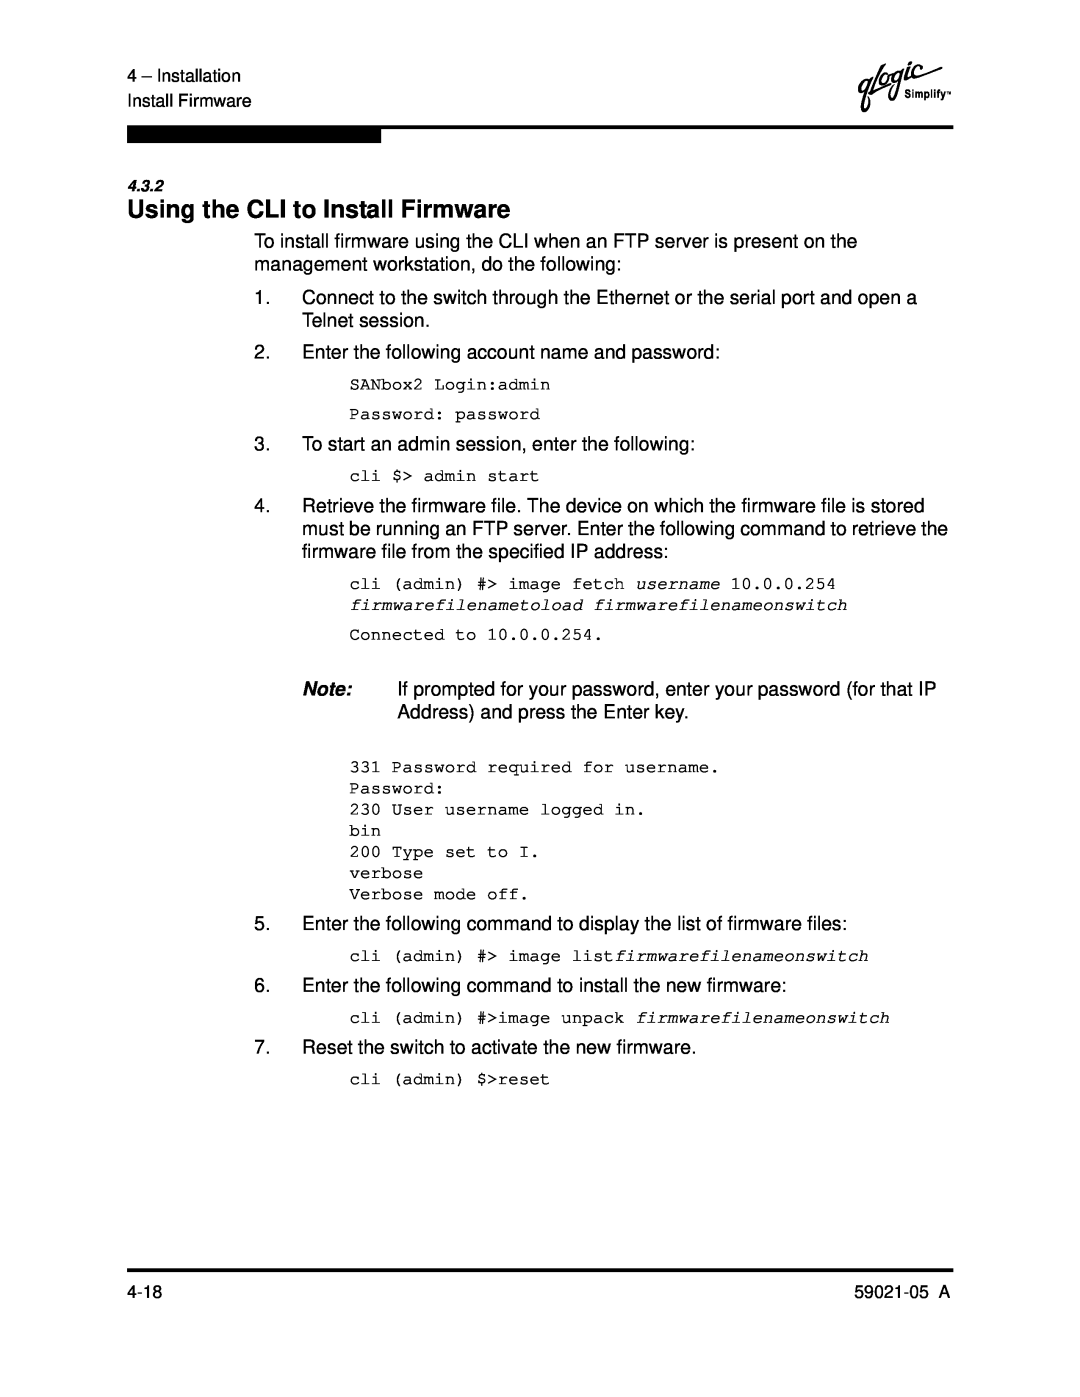 Q-Logic 59021-05 manual Using the CLI to Install Firmware 